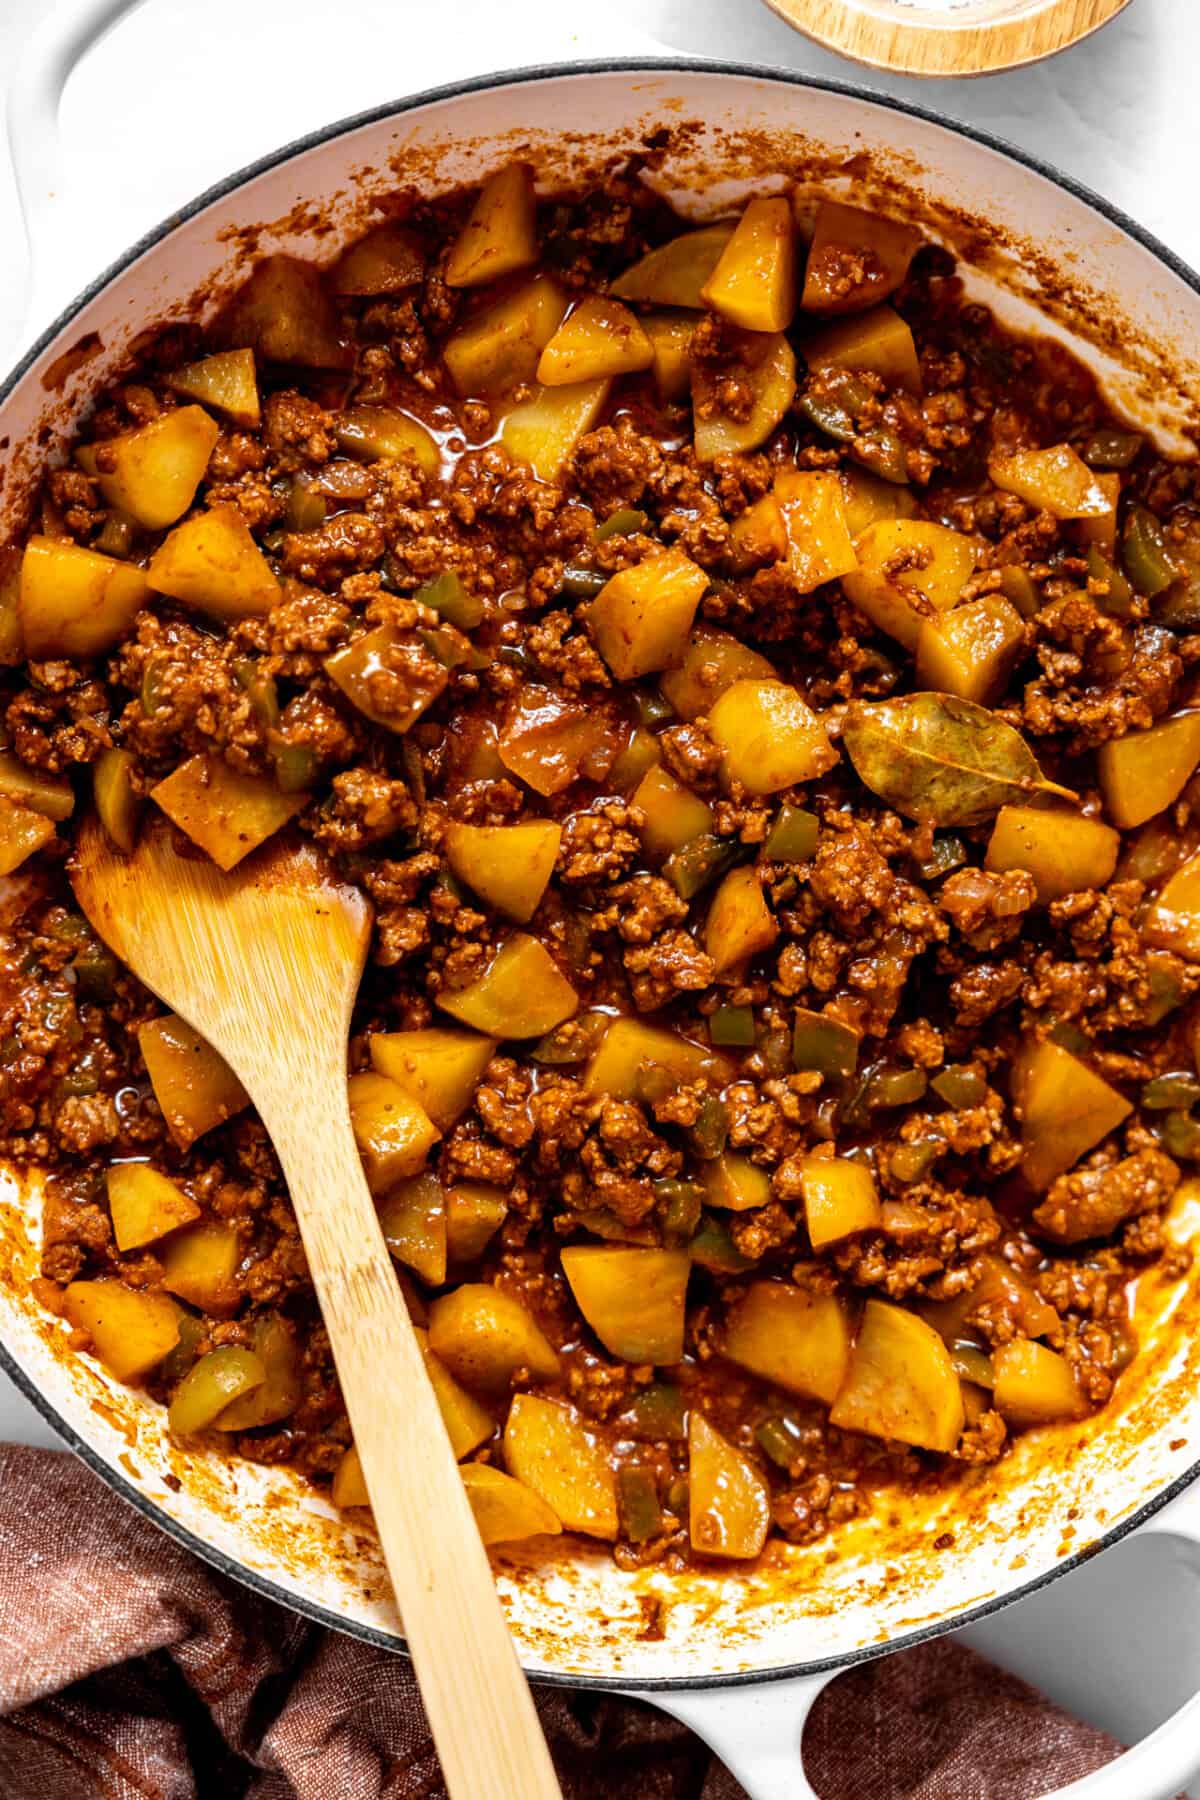 Skillet filled with Mexican picadillo.